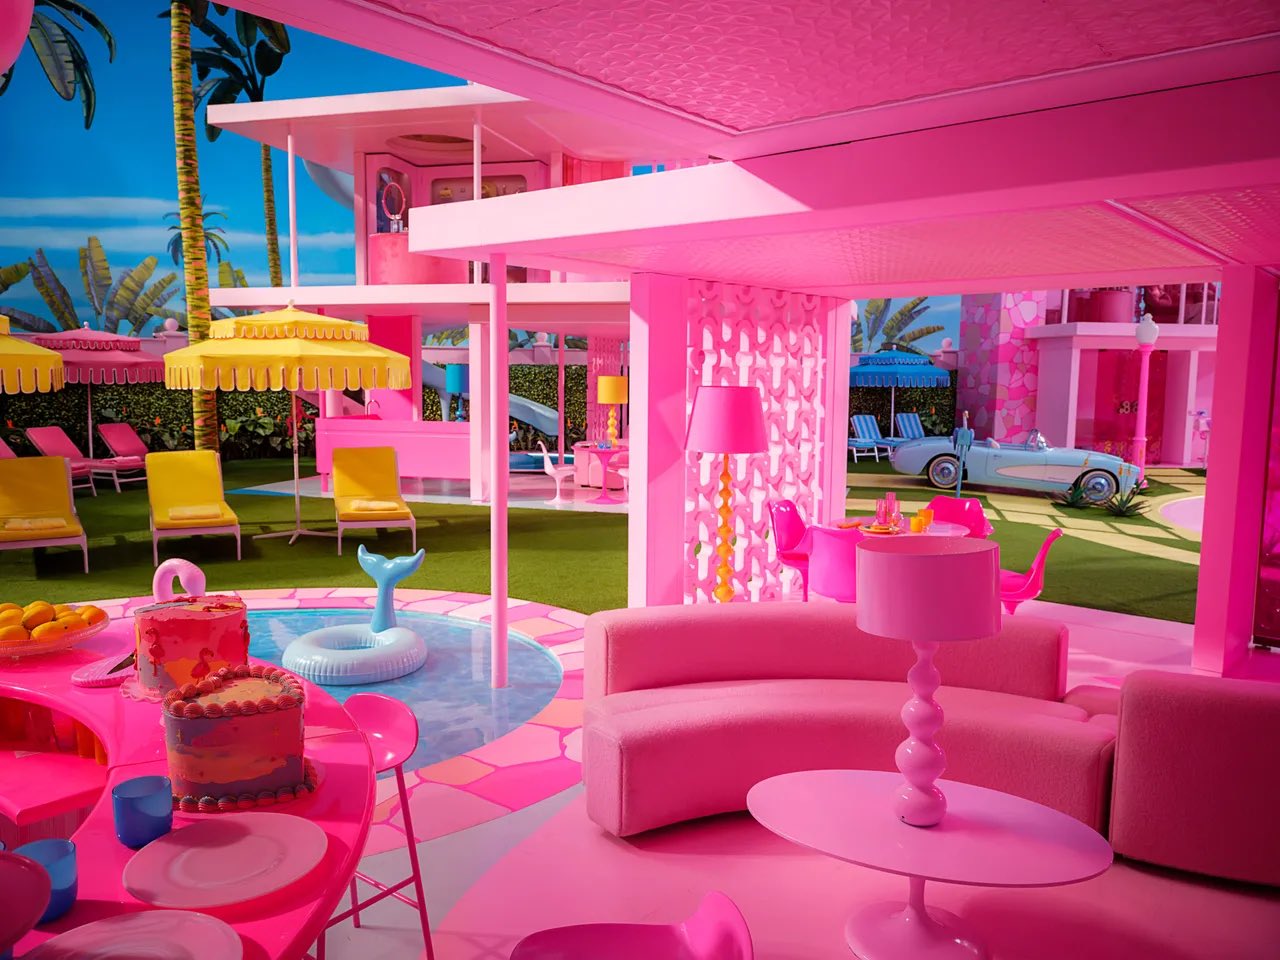 Barbie movie set used so much pink that it caused an international shortage of pink paint